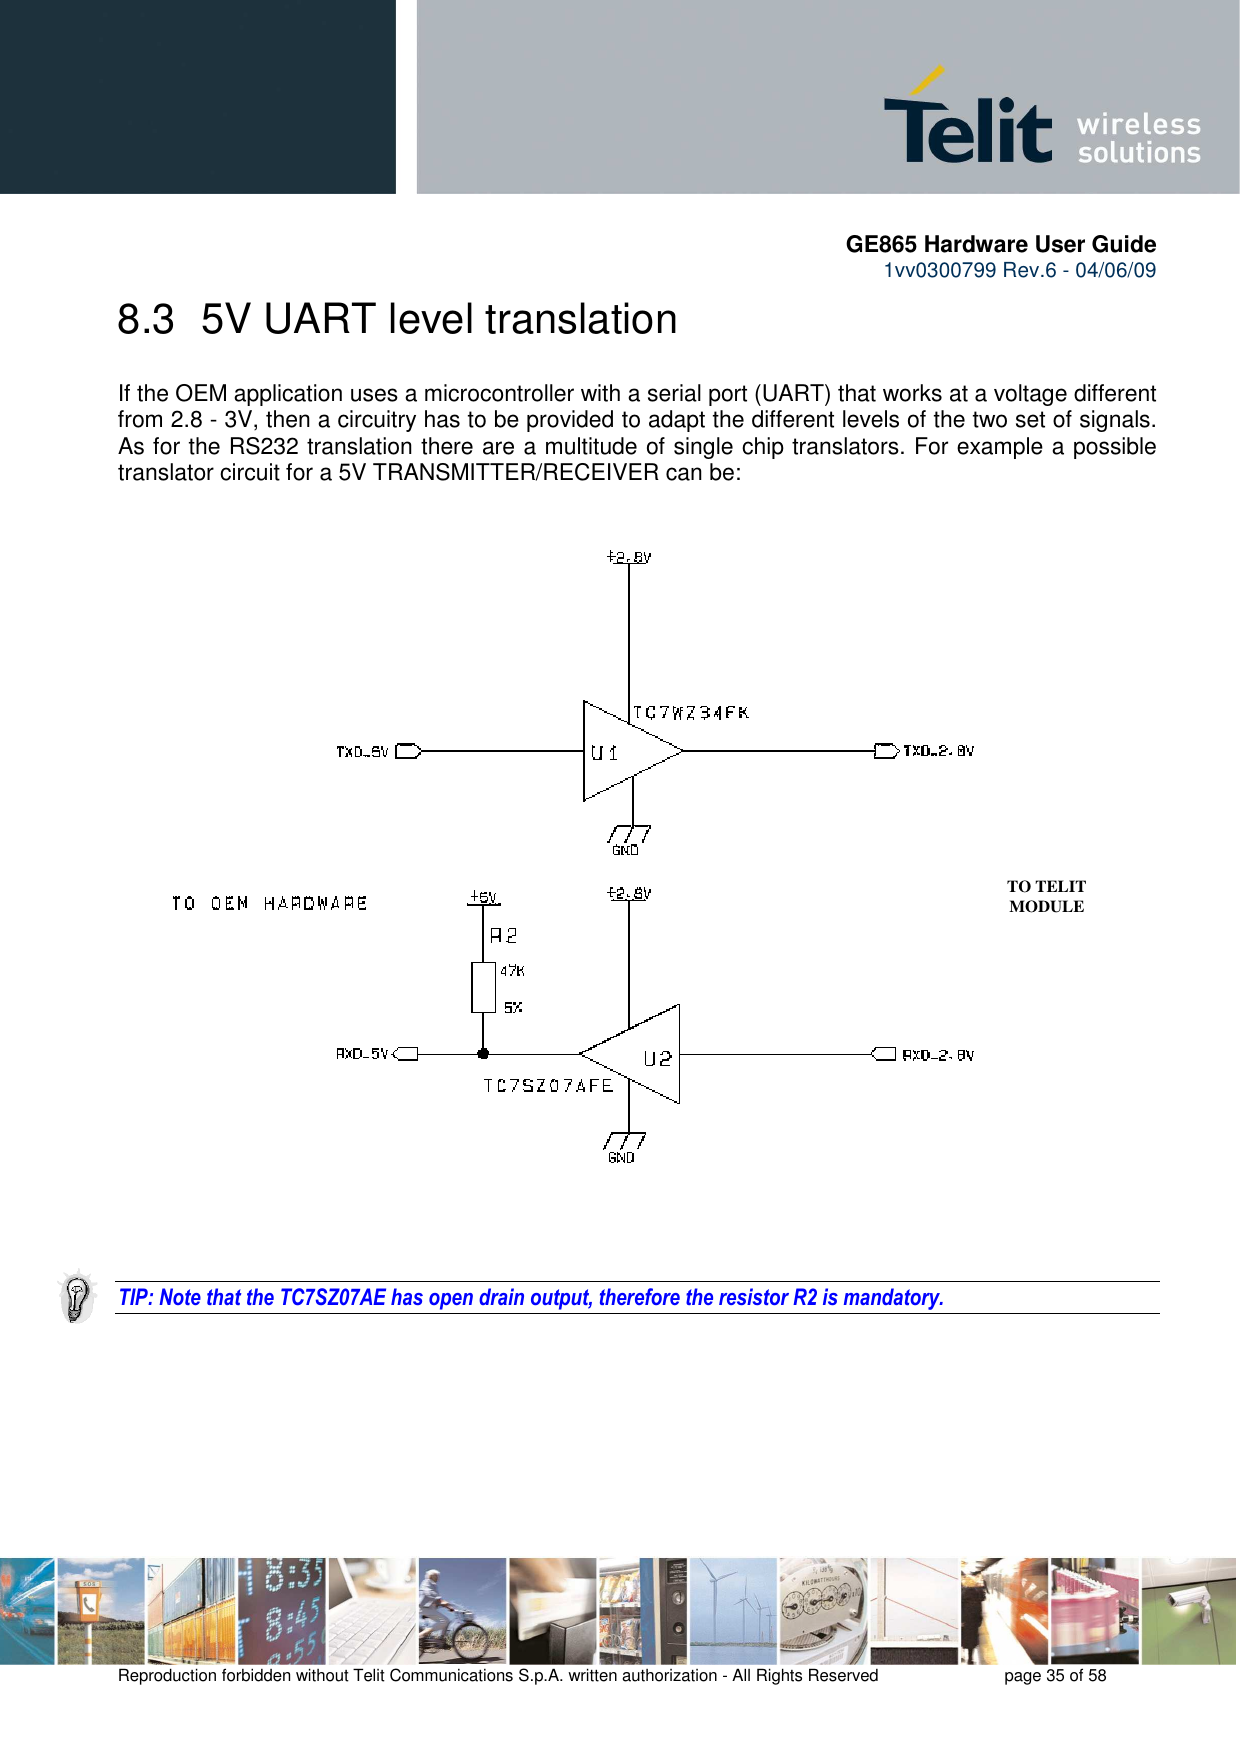       GE865 Hardware User Guide 1vv0300799 Rev.6 - 04/06/09      Reproduction forbidden without Telit Communications S.p.A. written authorization - All Rights Reserved    page 35 of 58  8.3  5V UART level translation If the OEM application uses a microcontroller with a serial port (UART) that works at a voltage different from 2.8 - 3V, then a circuitry has to be provided to adapt the different levels of the two set of signals. As for the RS232 translation there are a multitude of single chip translators. For example a possible translator circuit for a 5V TRANSMITTER/RECEIVER can be:      TIP: Note that the TC7SZ07AE has open drain output, therefore the resistor R2 is mandatory.          TO TELIT MODULE 